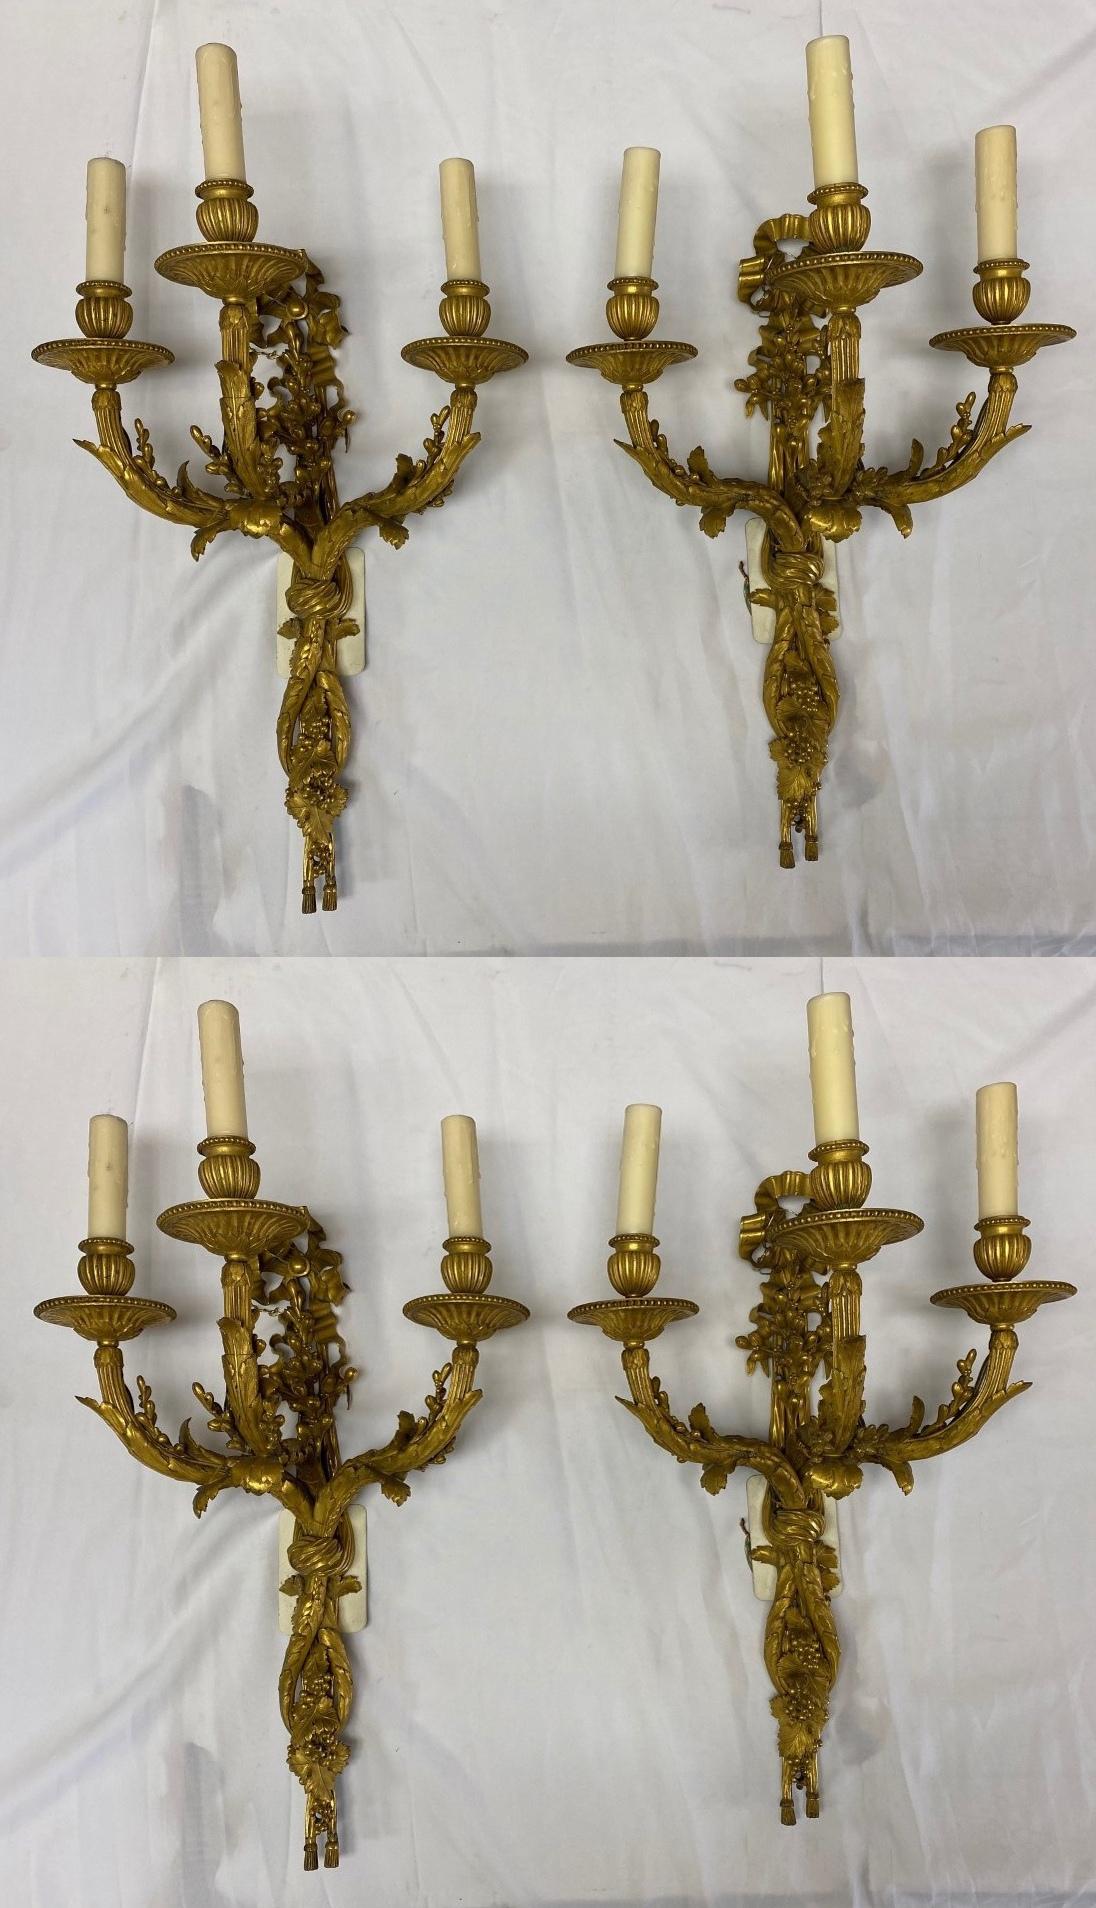 Exquisite 19 century French set of 4 ormolu two light sconces with handmade wax candle sleeves.
Late 19th century
Each with a ribbon and woven grapevine design supporting three acanthus-adorned candle lights, meticulous attention has given to